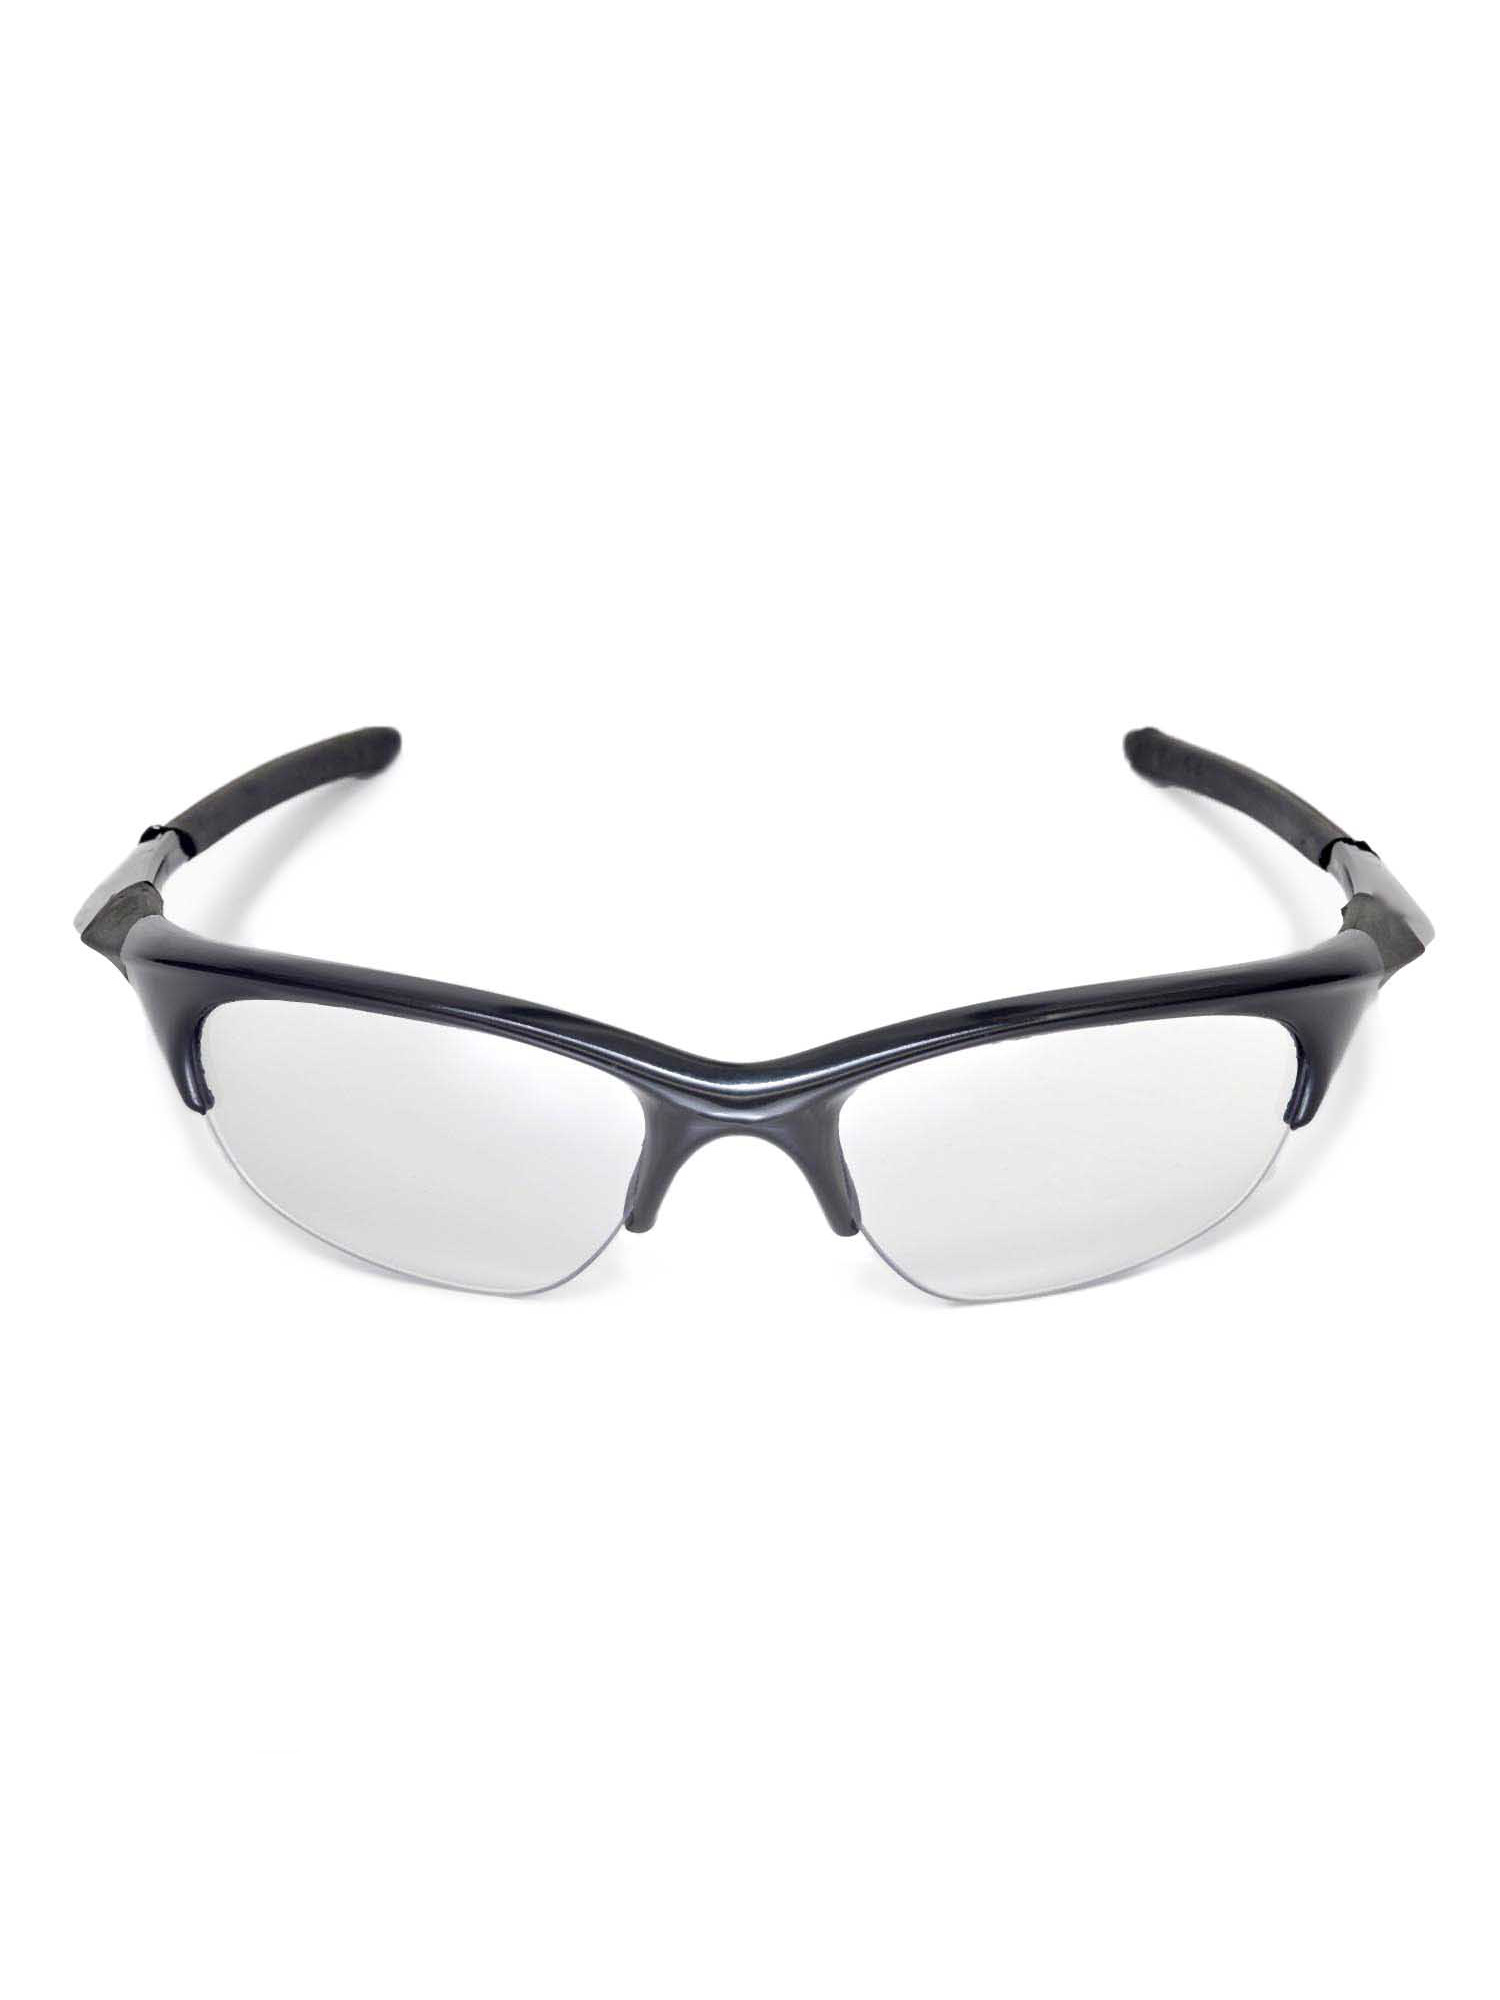 Walleva Clear Replacement Lenses for Oakley Half Jacket Sunglasses - image 5 of 7